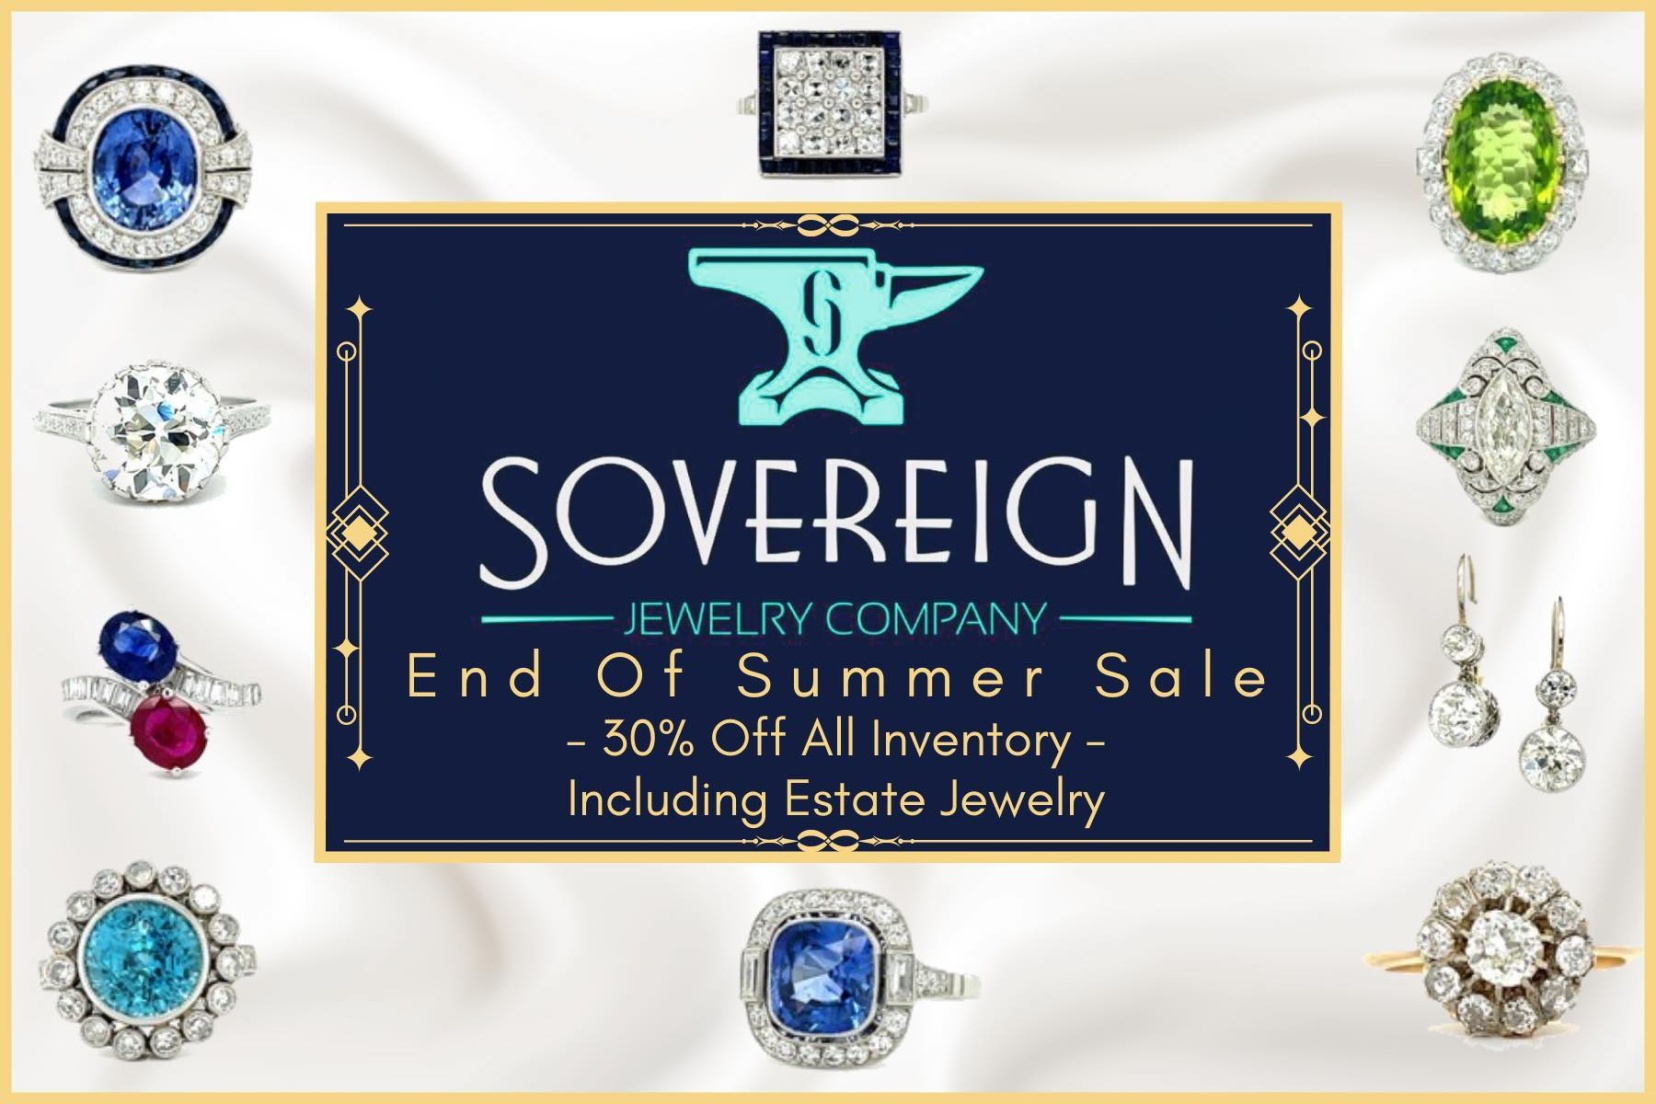 Sovereign Jewelry Company End of Summer Sale